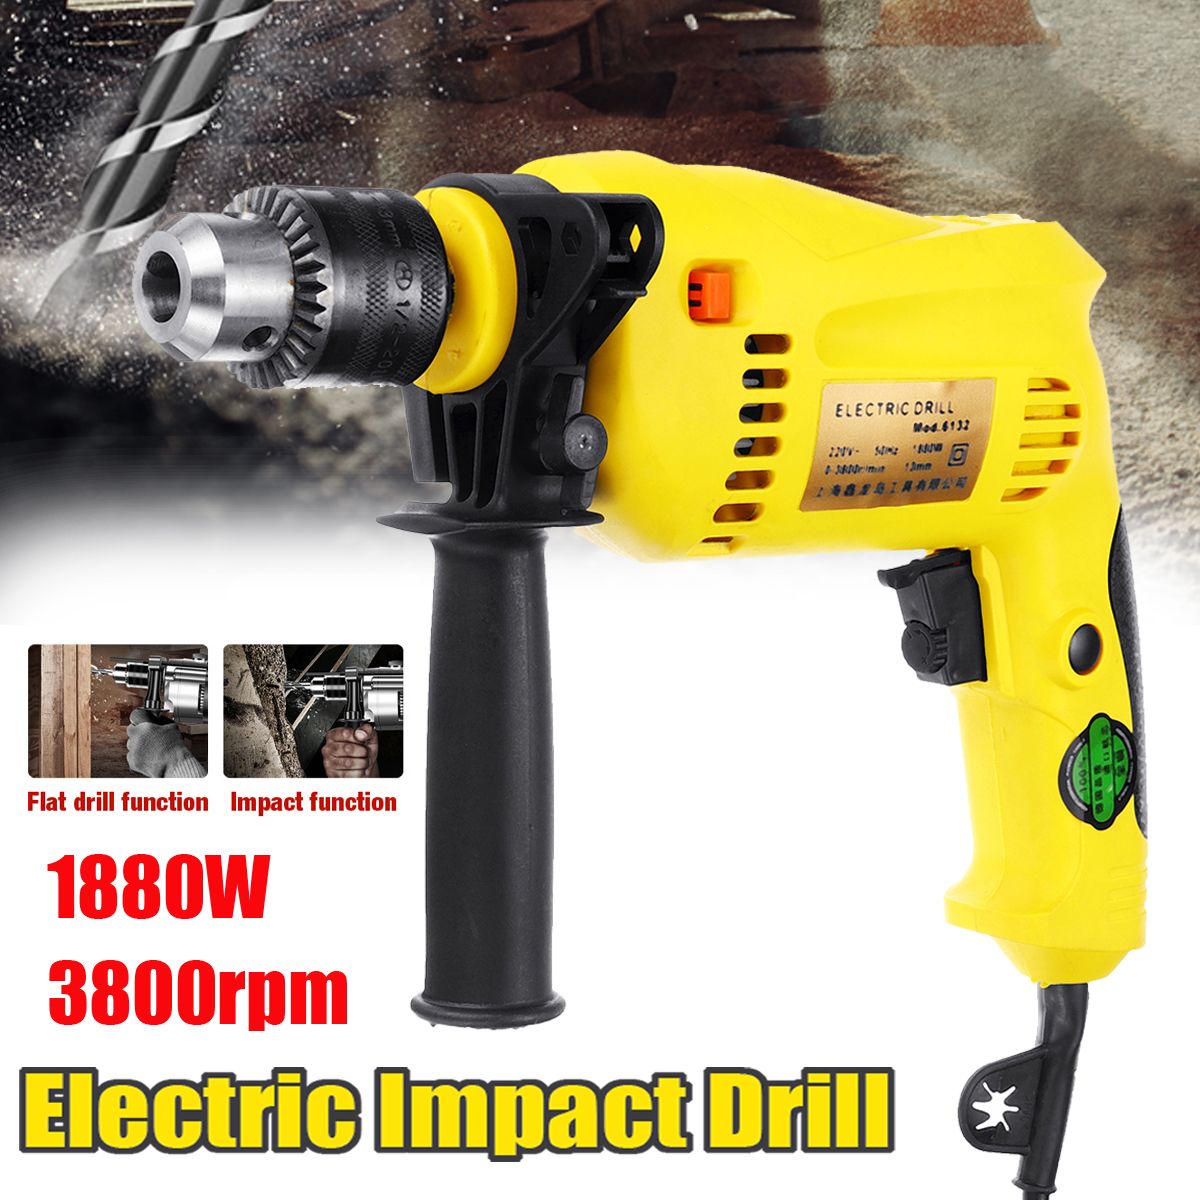 1880W-3800rpm-Electric-Impact-Drill-Wrench-13mm-Chuck-Brushless-Motor-Power-Tools-1529030